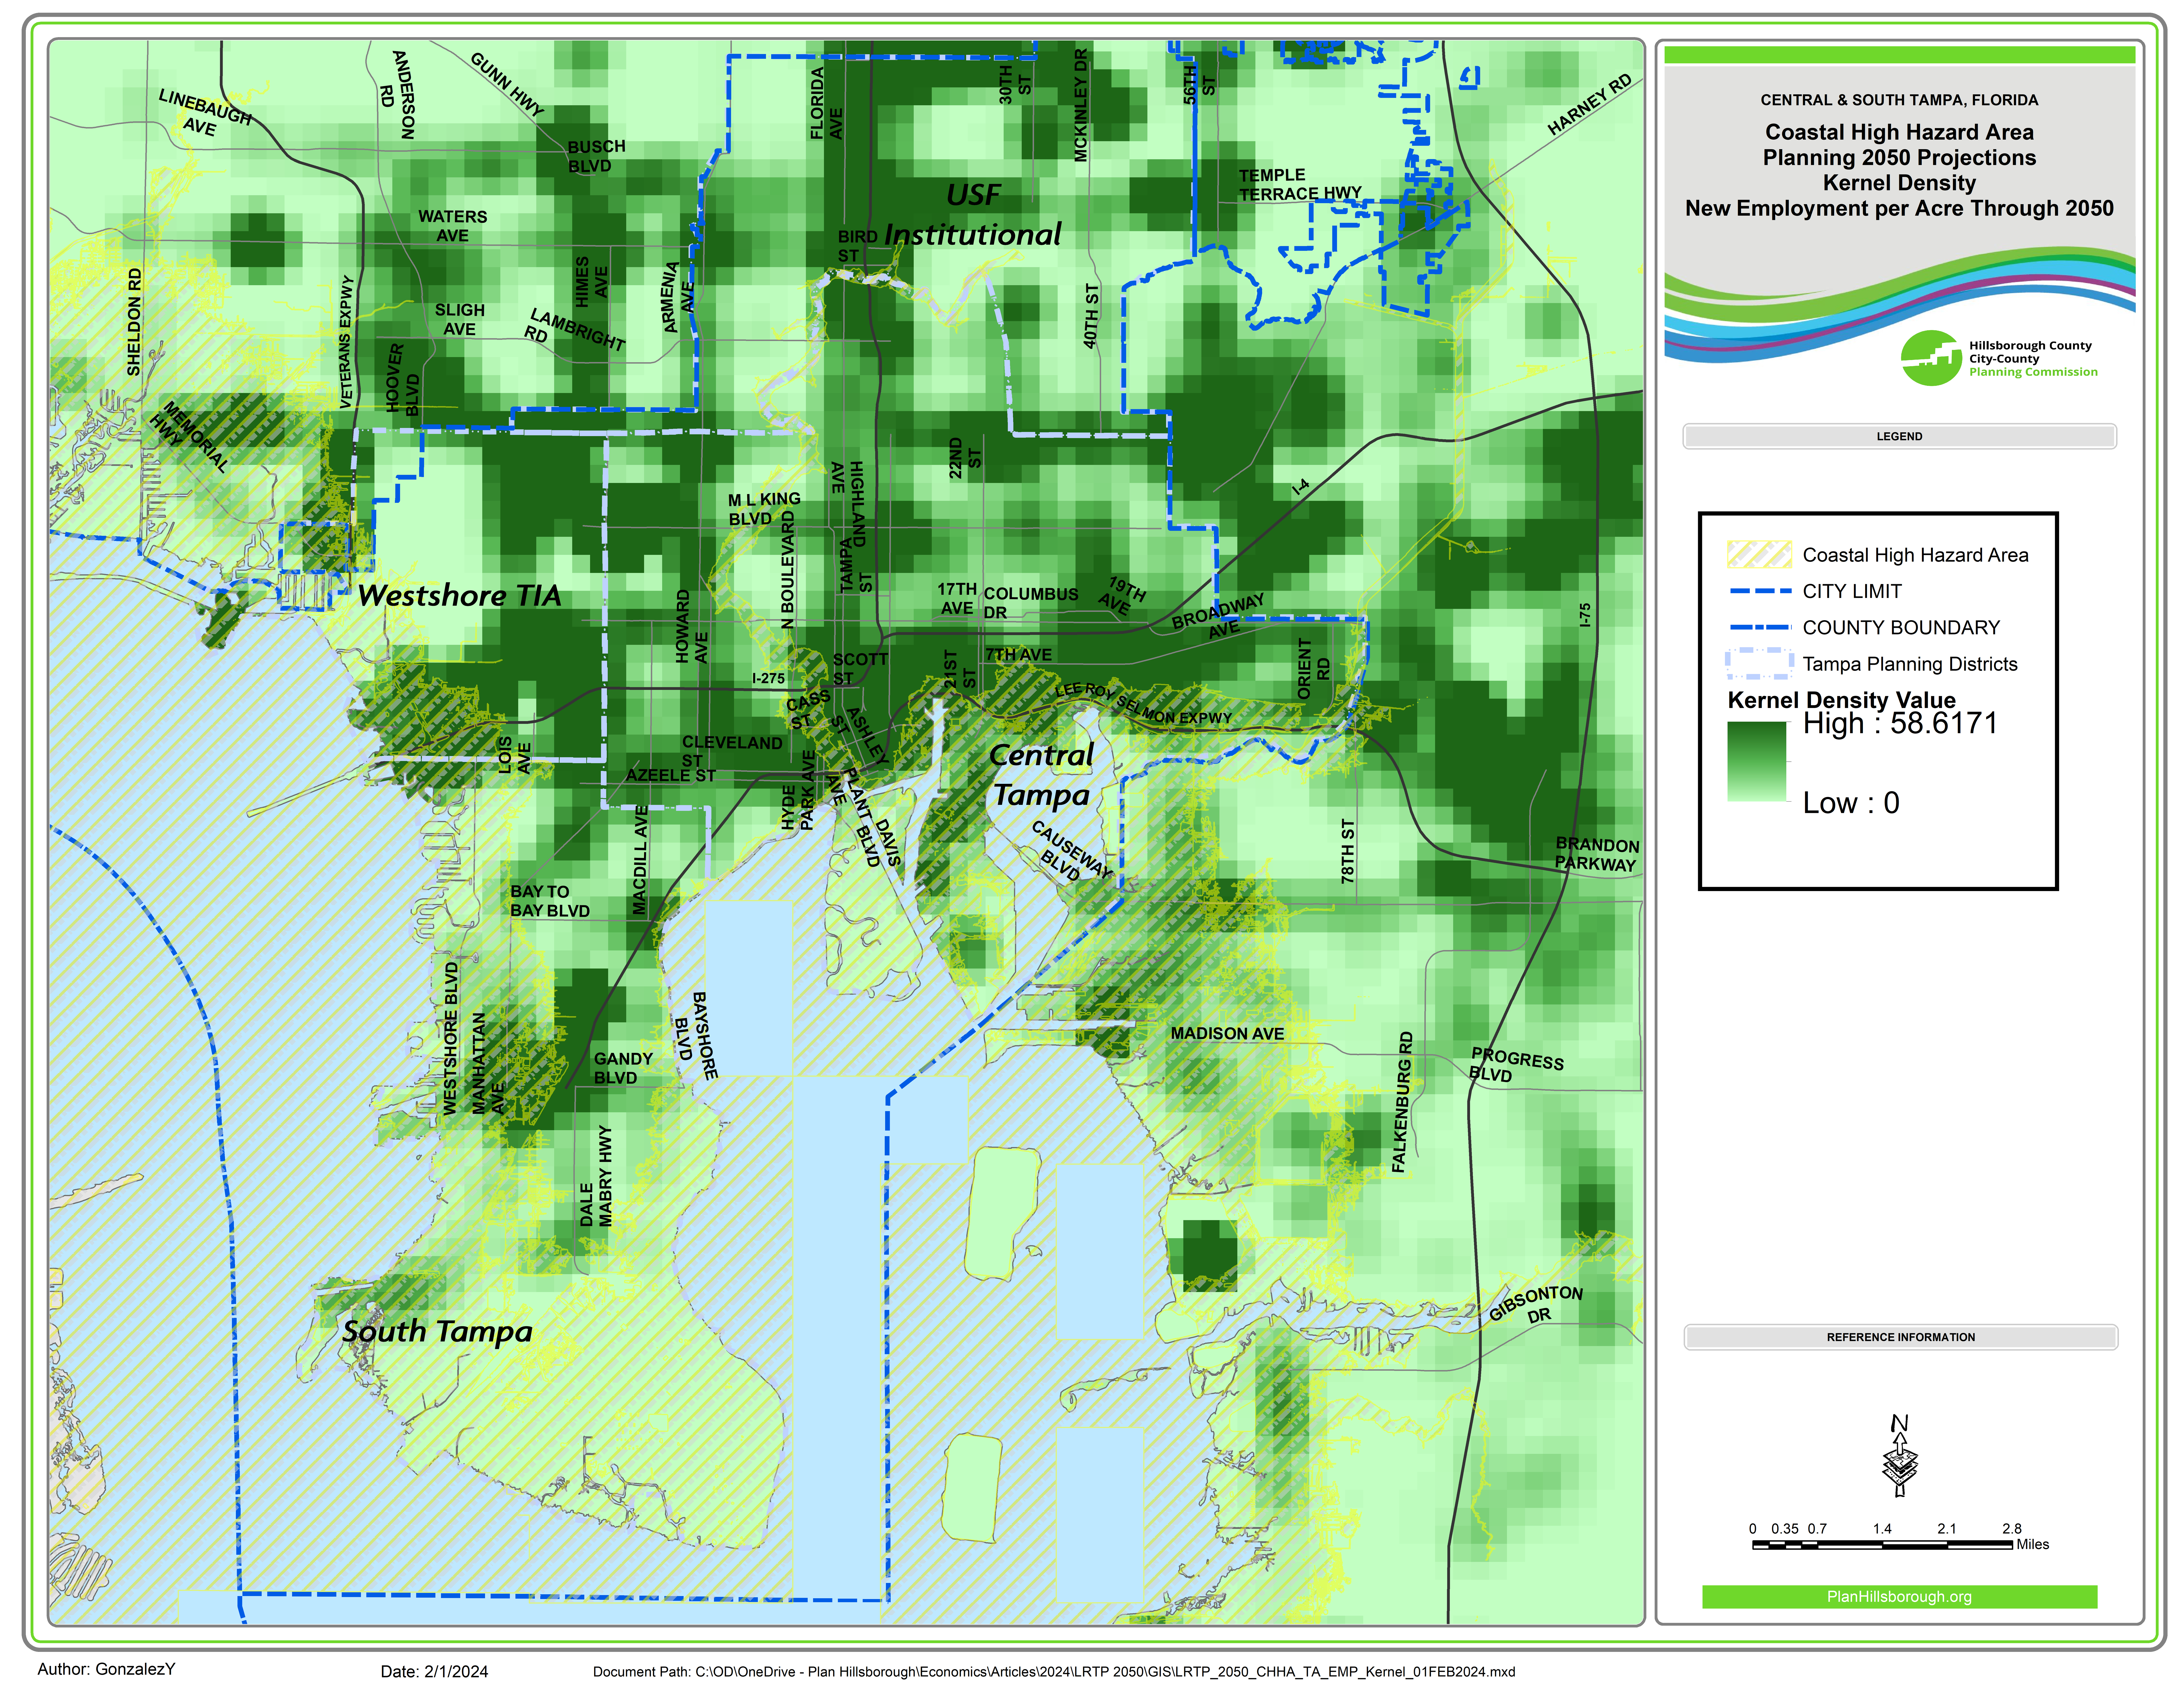 This map shows new jobs per acre through 2050 for Central and South Tampa. The map shows Tampa's planning districts, UHC's unincorporated planning areas, and the coastal high hazard area (hatched). Darker green areas denote a higher number of new jobs per acre through 2050.